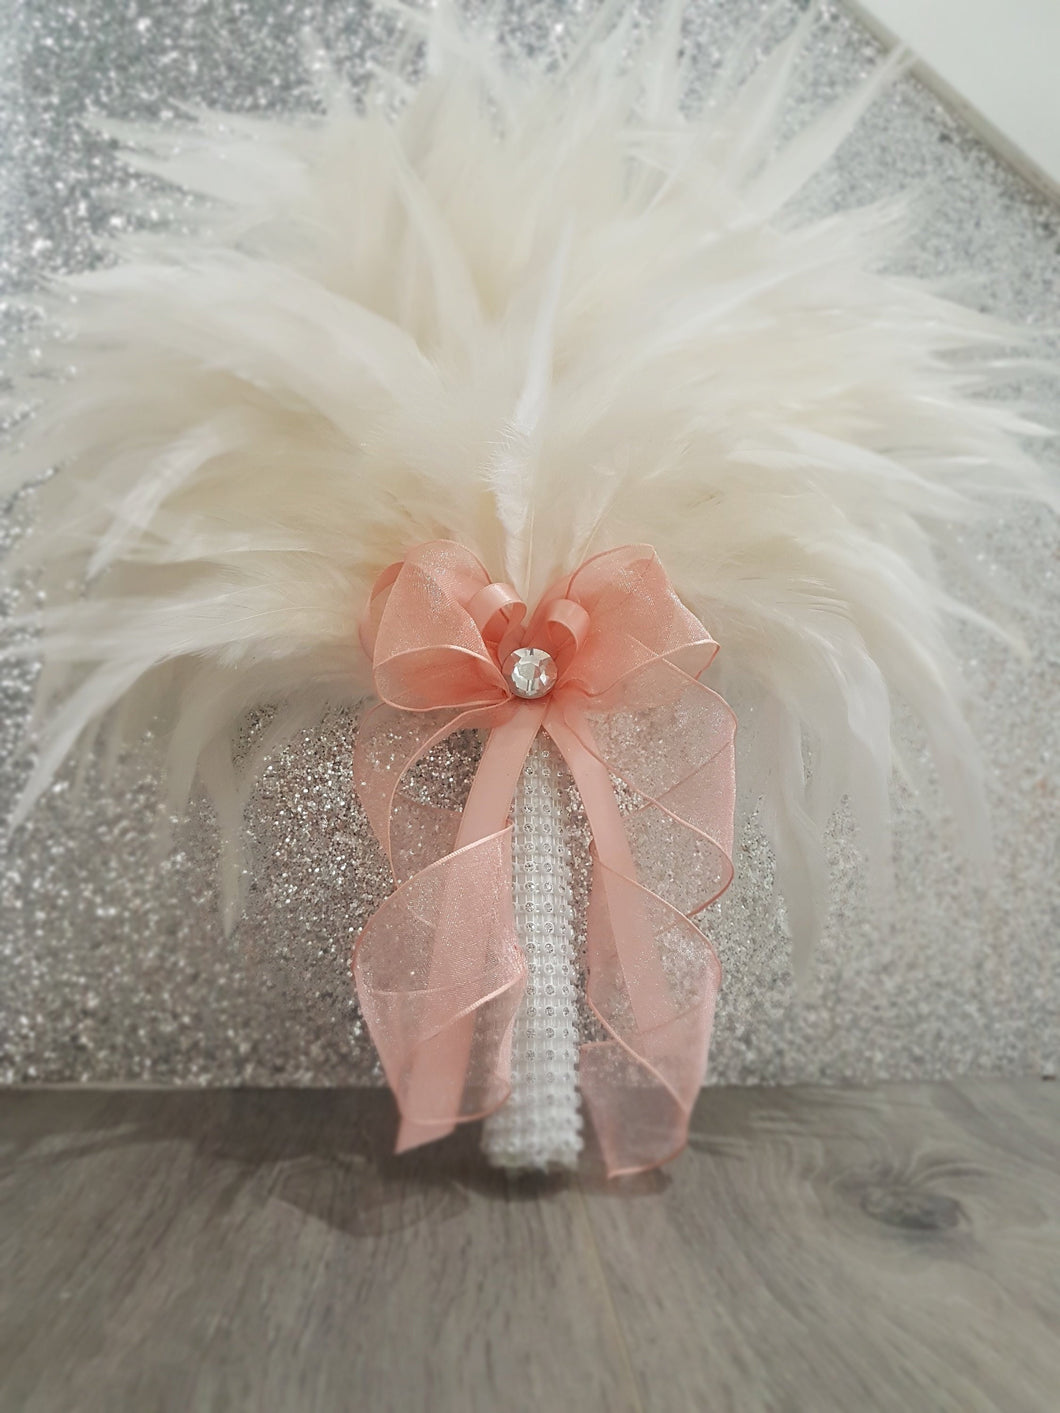 Brides Feather bouquet, Great Gatsby wedding style -ANY COLOUR by Crystal wedding uk